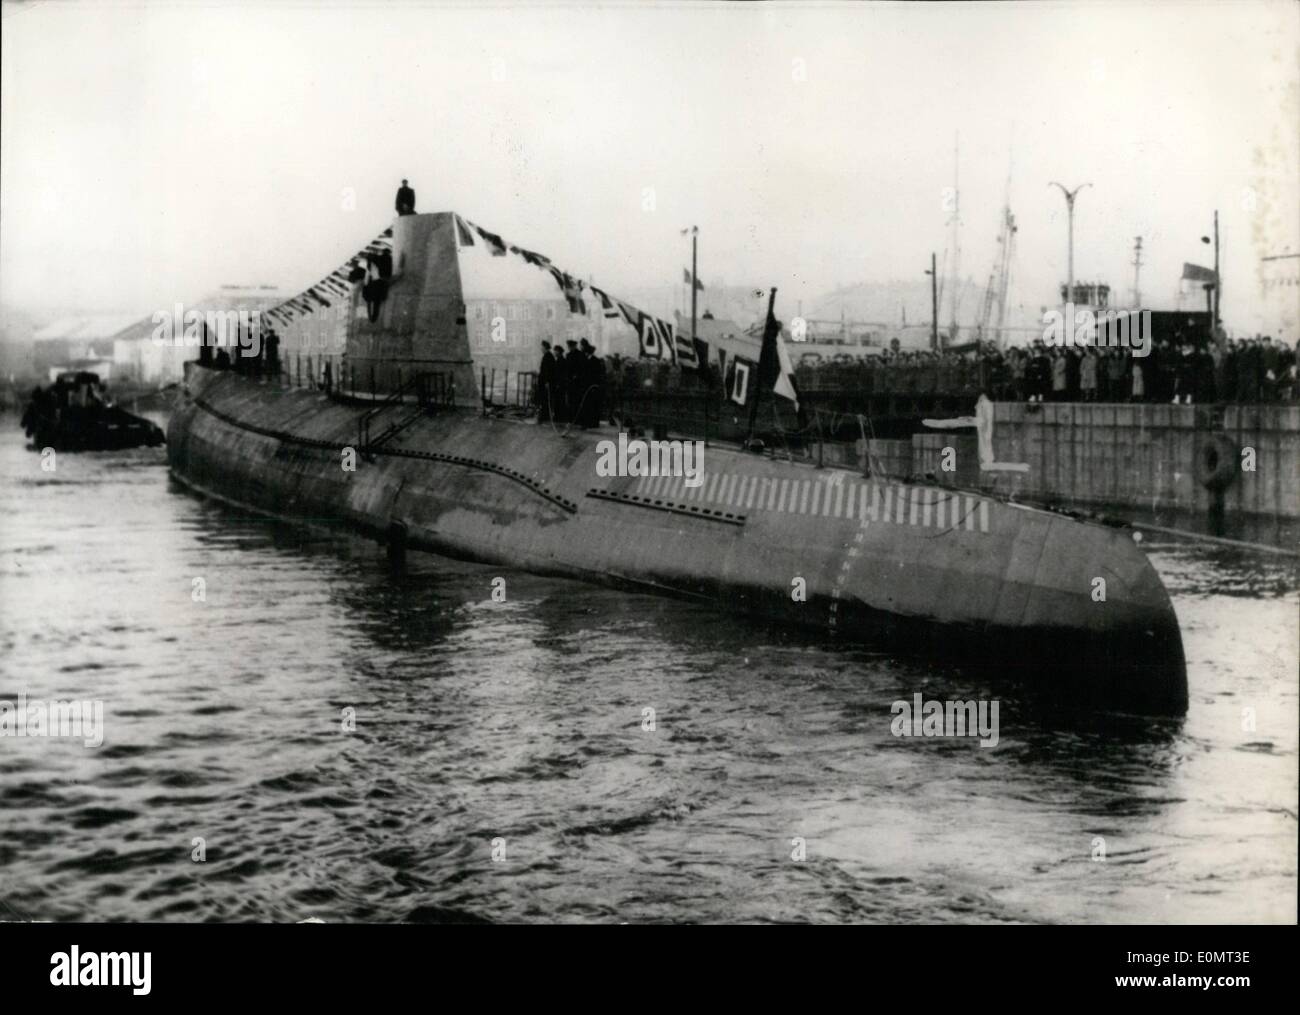 Jun. 06, 1956 - French Sub to Try to Beat Deep Diving Record: The ''Narval'', French Submarine, will try to beat the world's deep diving record off Lorient next week. Photo shows a view of the submarine. Stock Photo